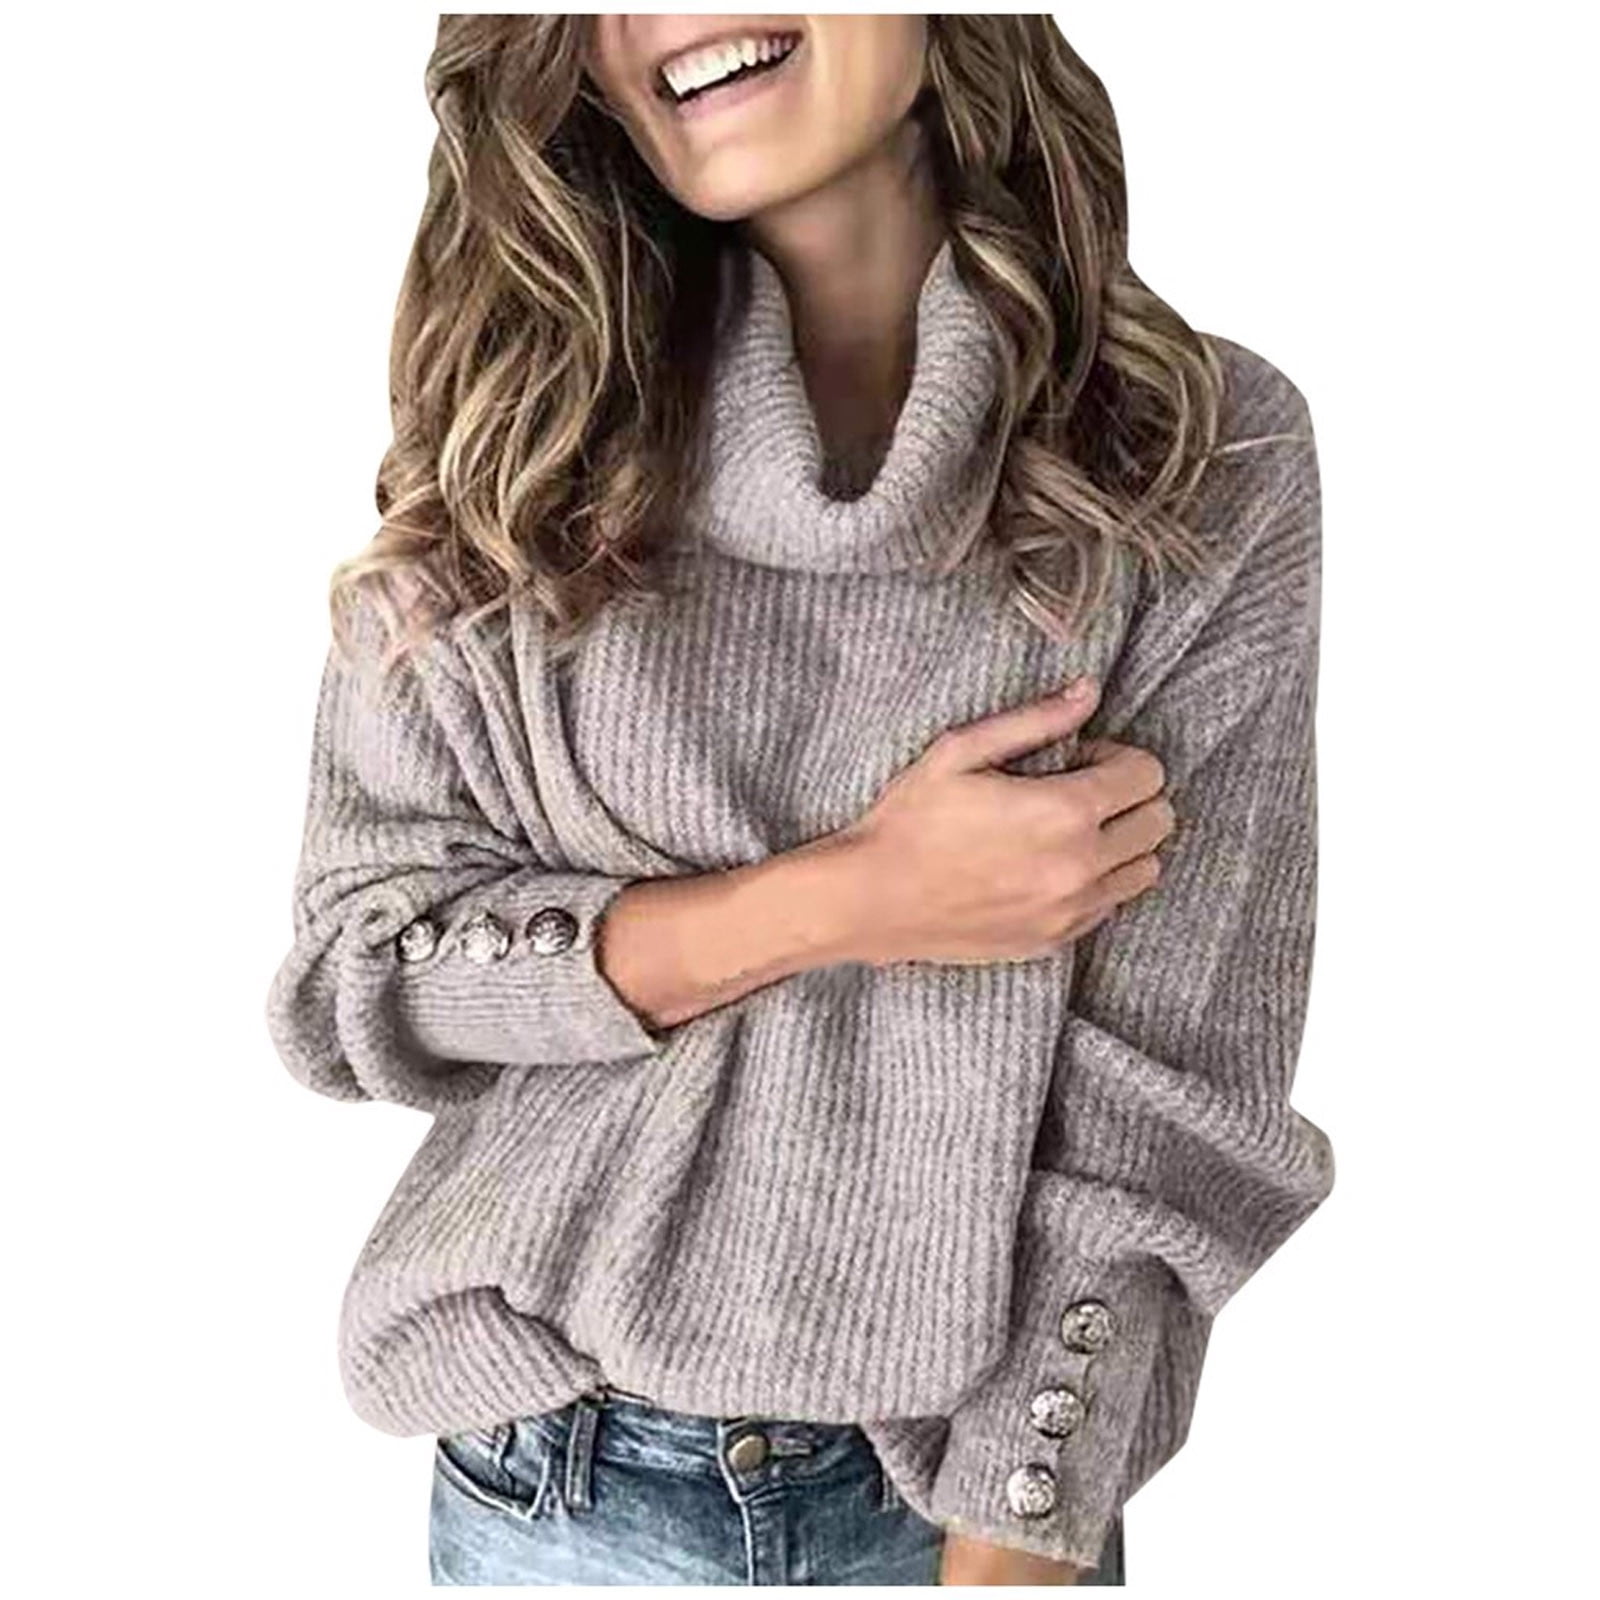 SMihono Clearance Cowl Neck Knitted Sweaters Knitwear Womens Plus Long  Sleeve Fashion Solid Casual Tops for Women Female Leisure White XXXL 